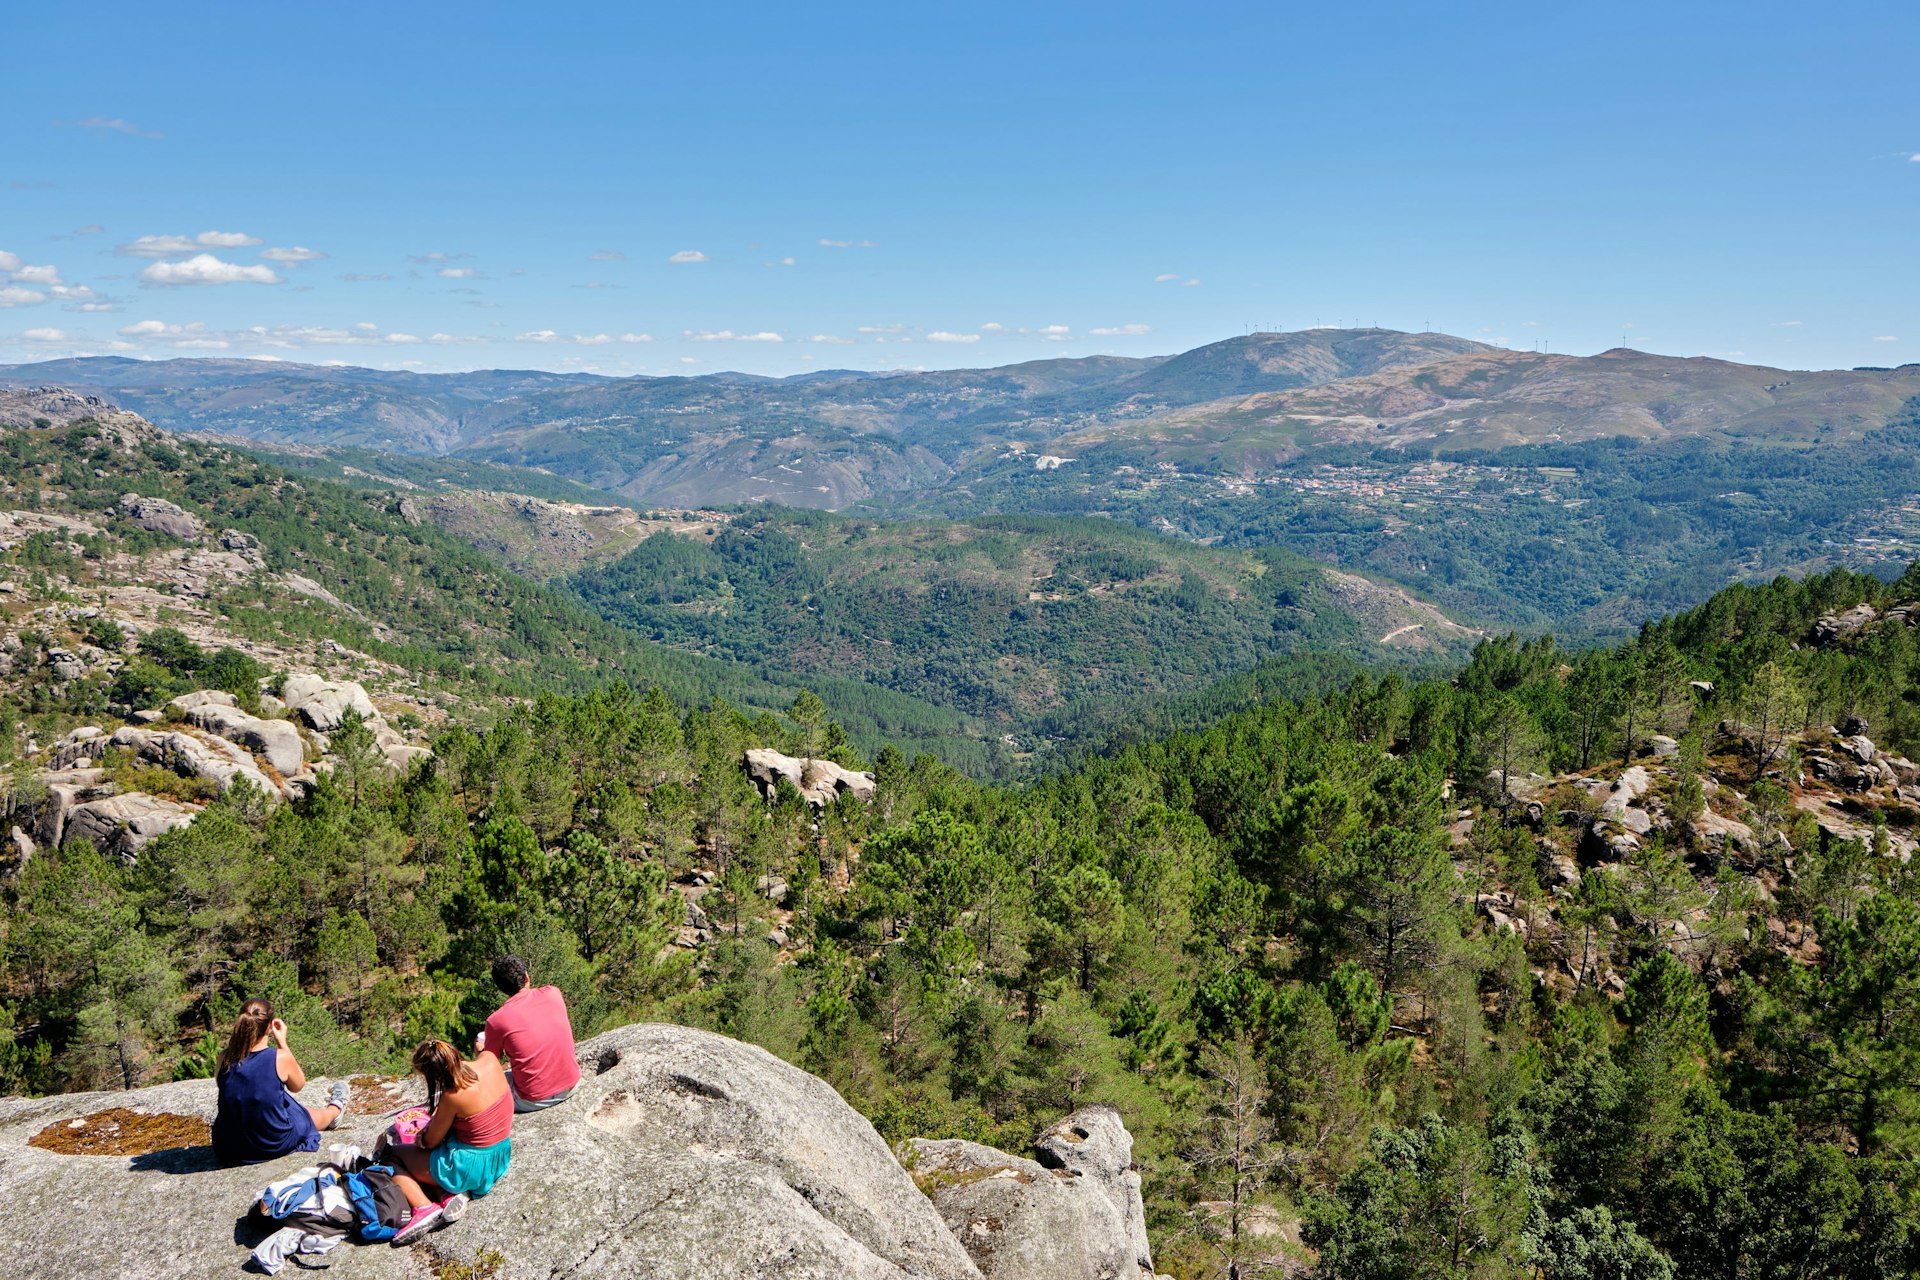 Hikers rest on a rocky outcrop overlooking forested mountains at Peneda-Gerês National Park, Gerês, Portugal, Europe